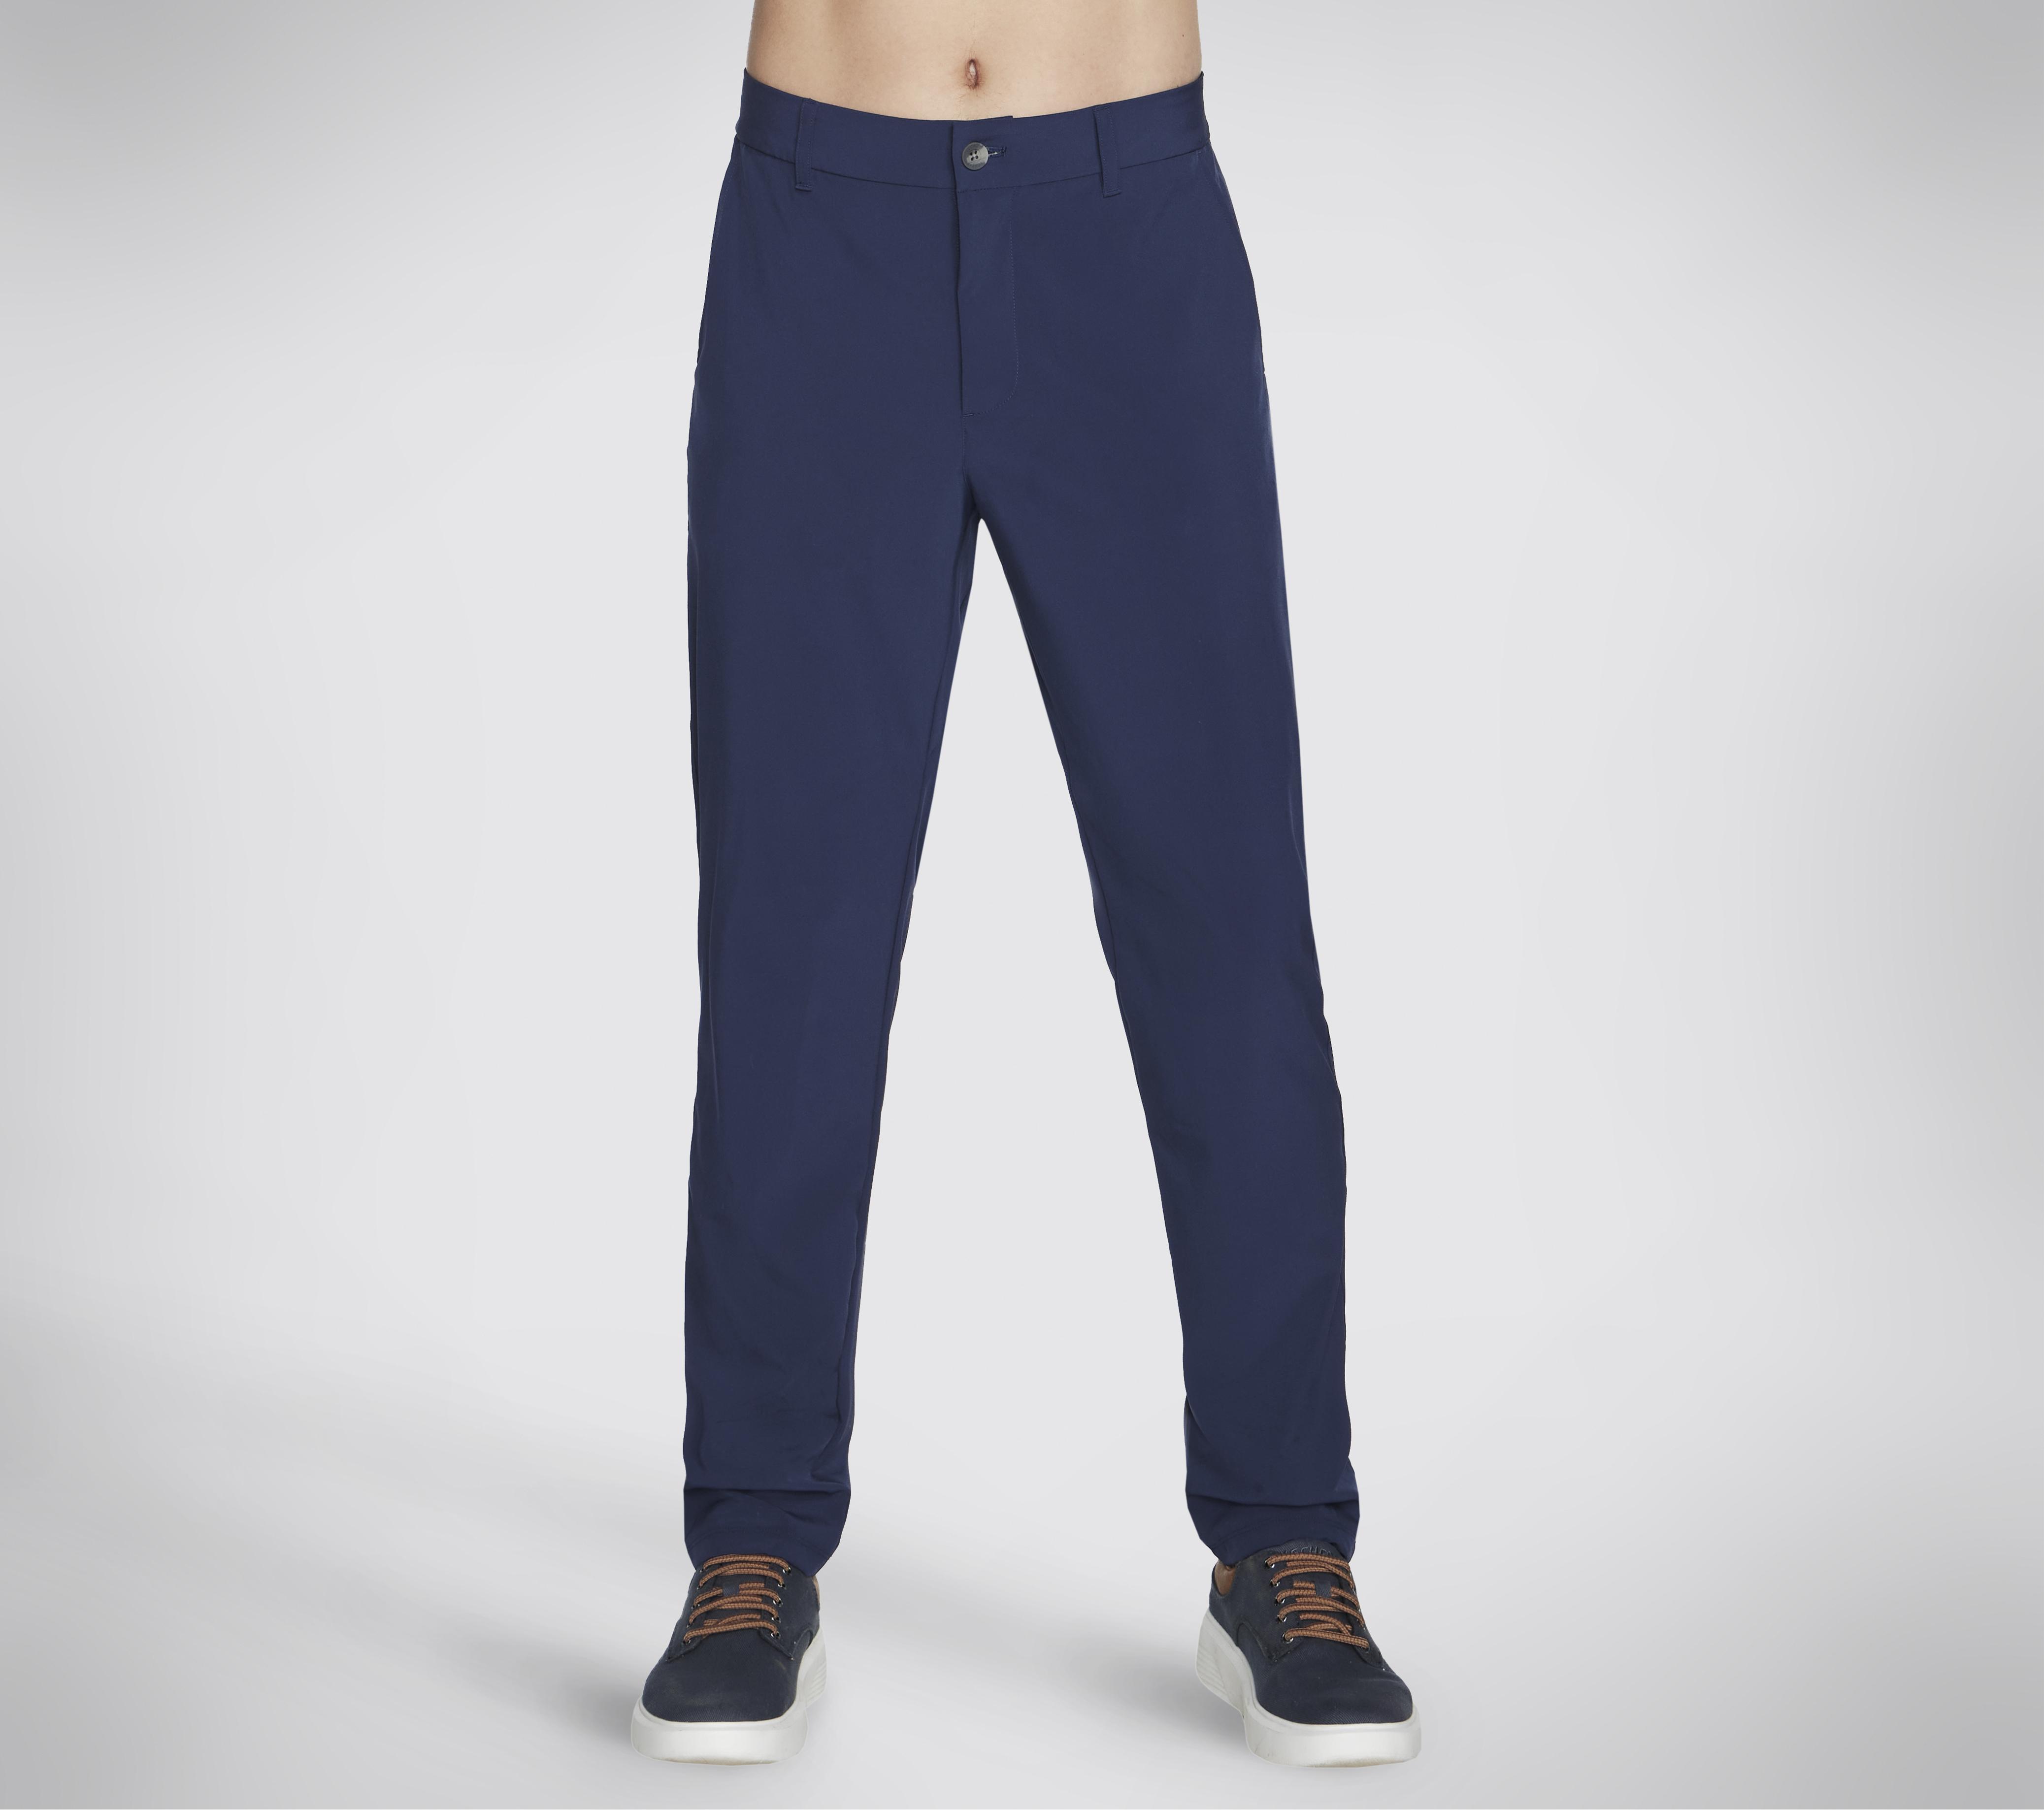 Skechers go walk pants Blue Size L petite - $20 (59% Off Retail) New With  Tags - From lorelei